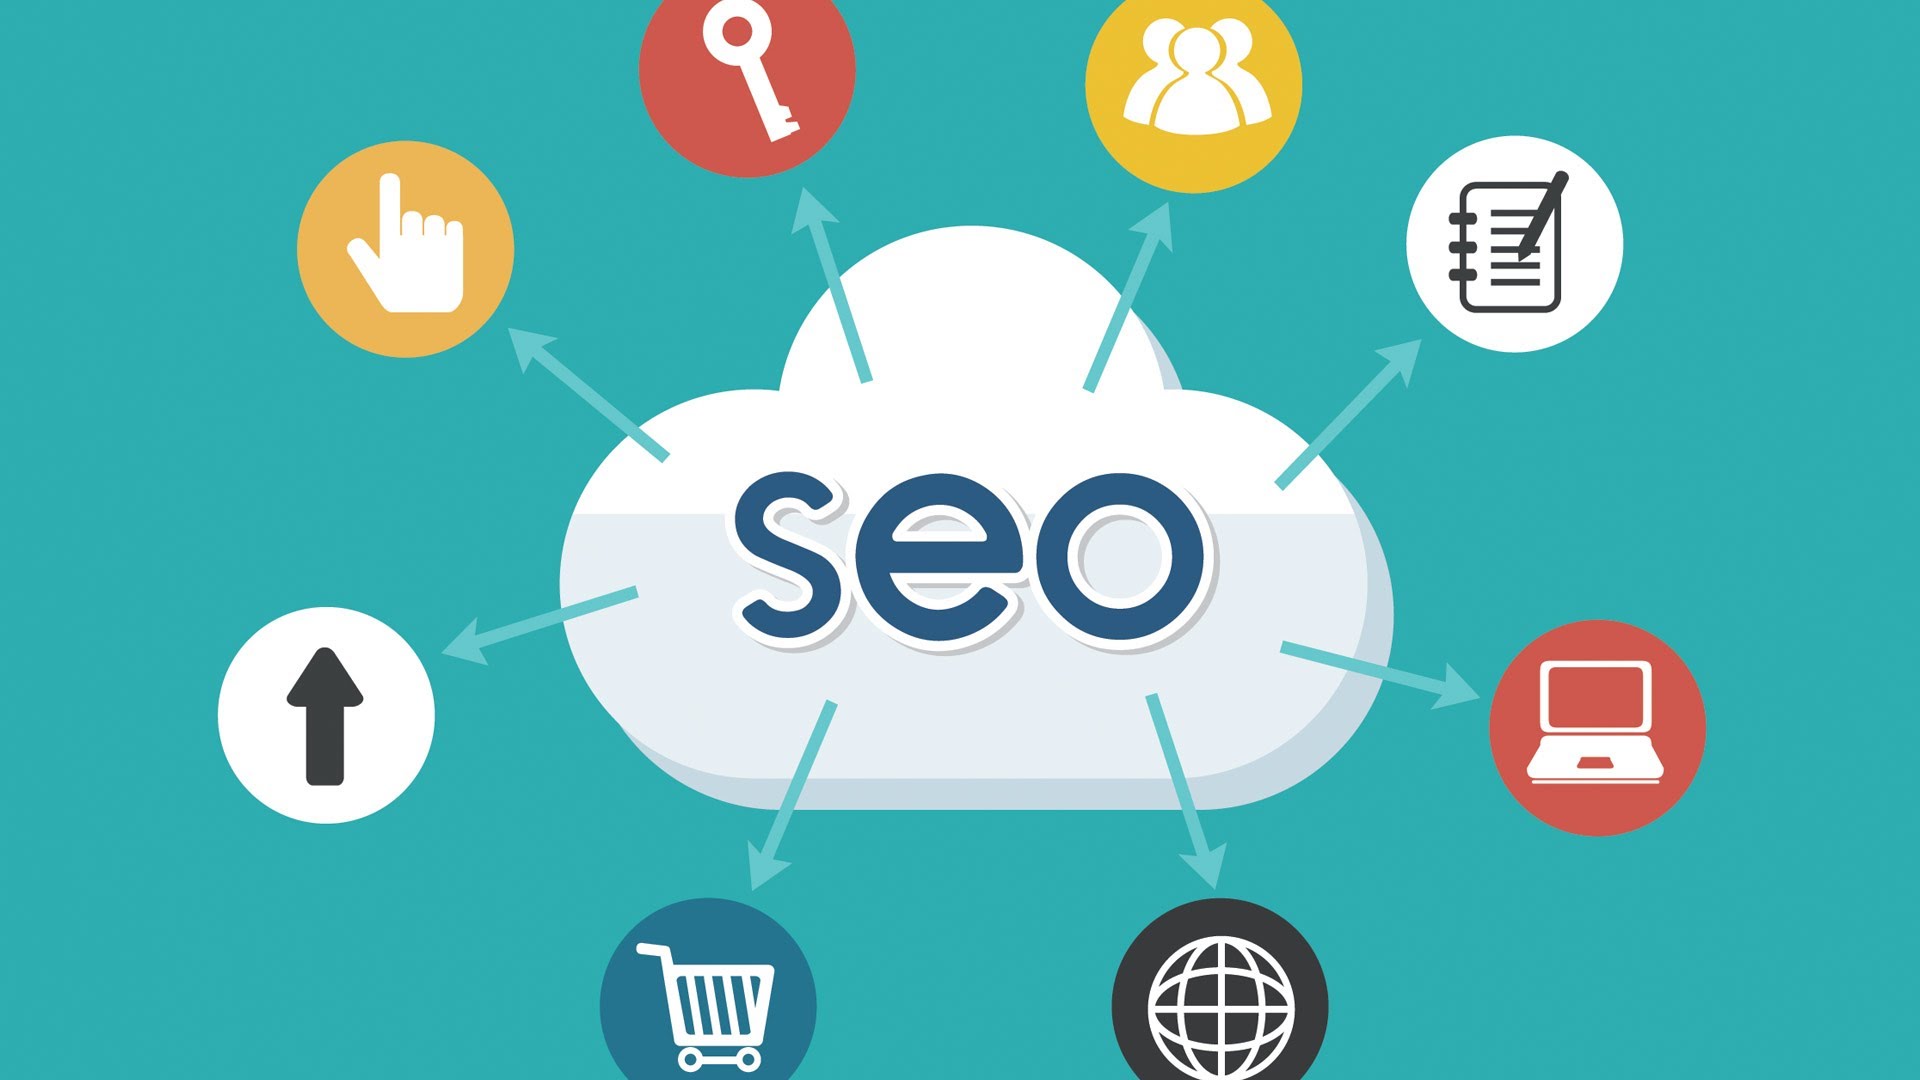 Why there is the need of SEO for your website?